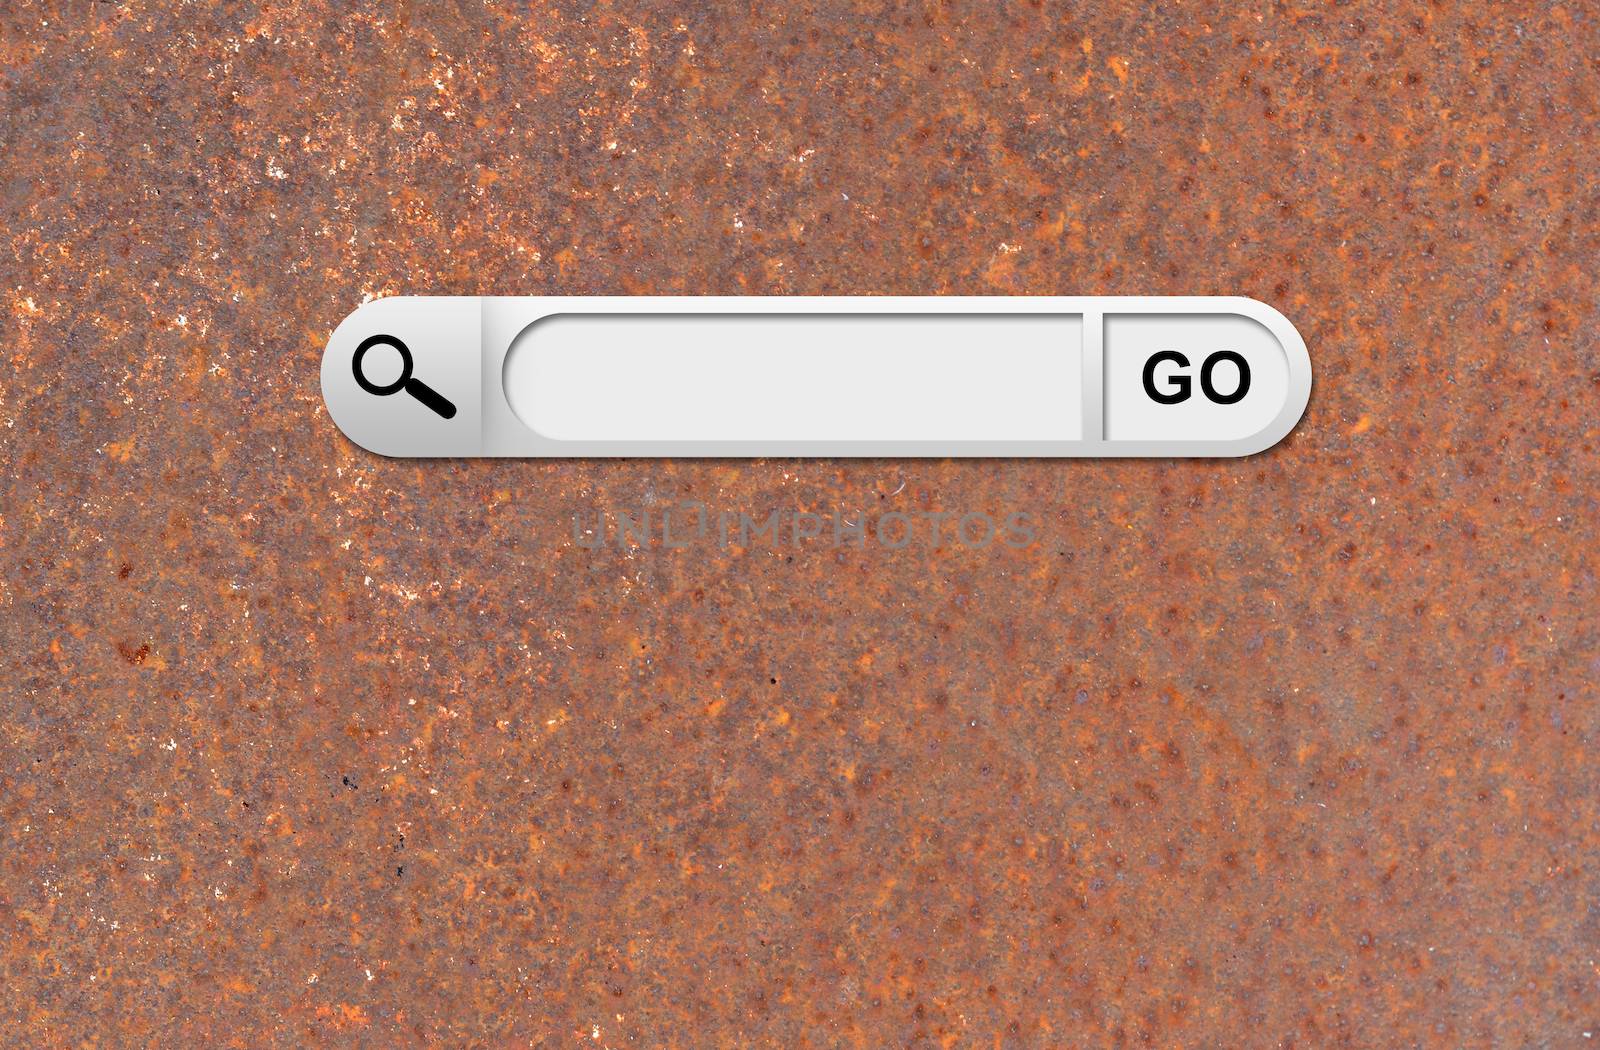 Search bar in browser. Old rusty metal surface on background